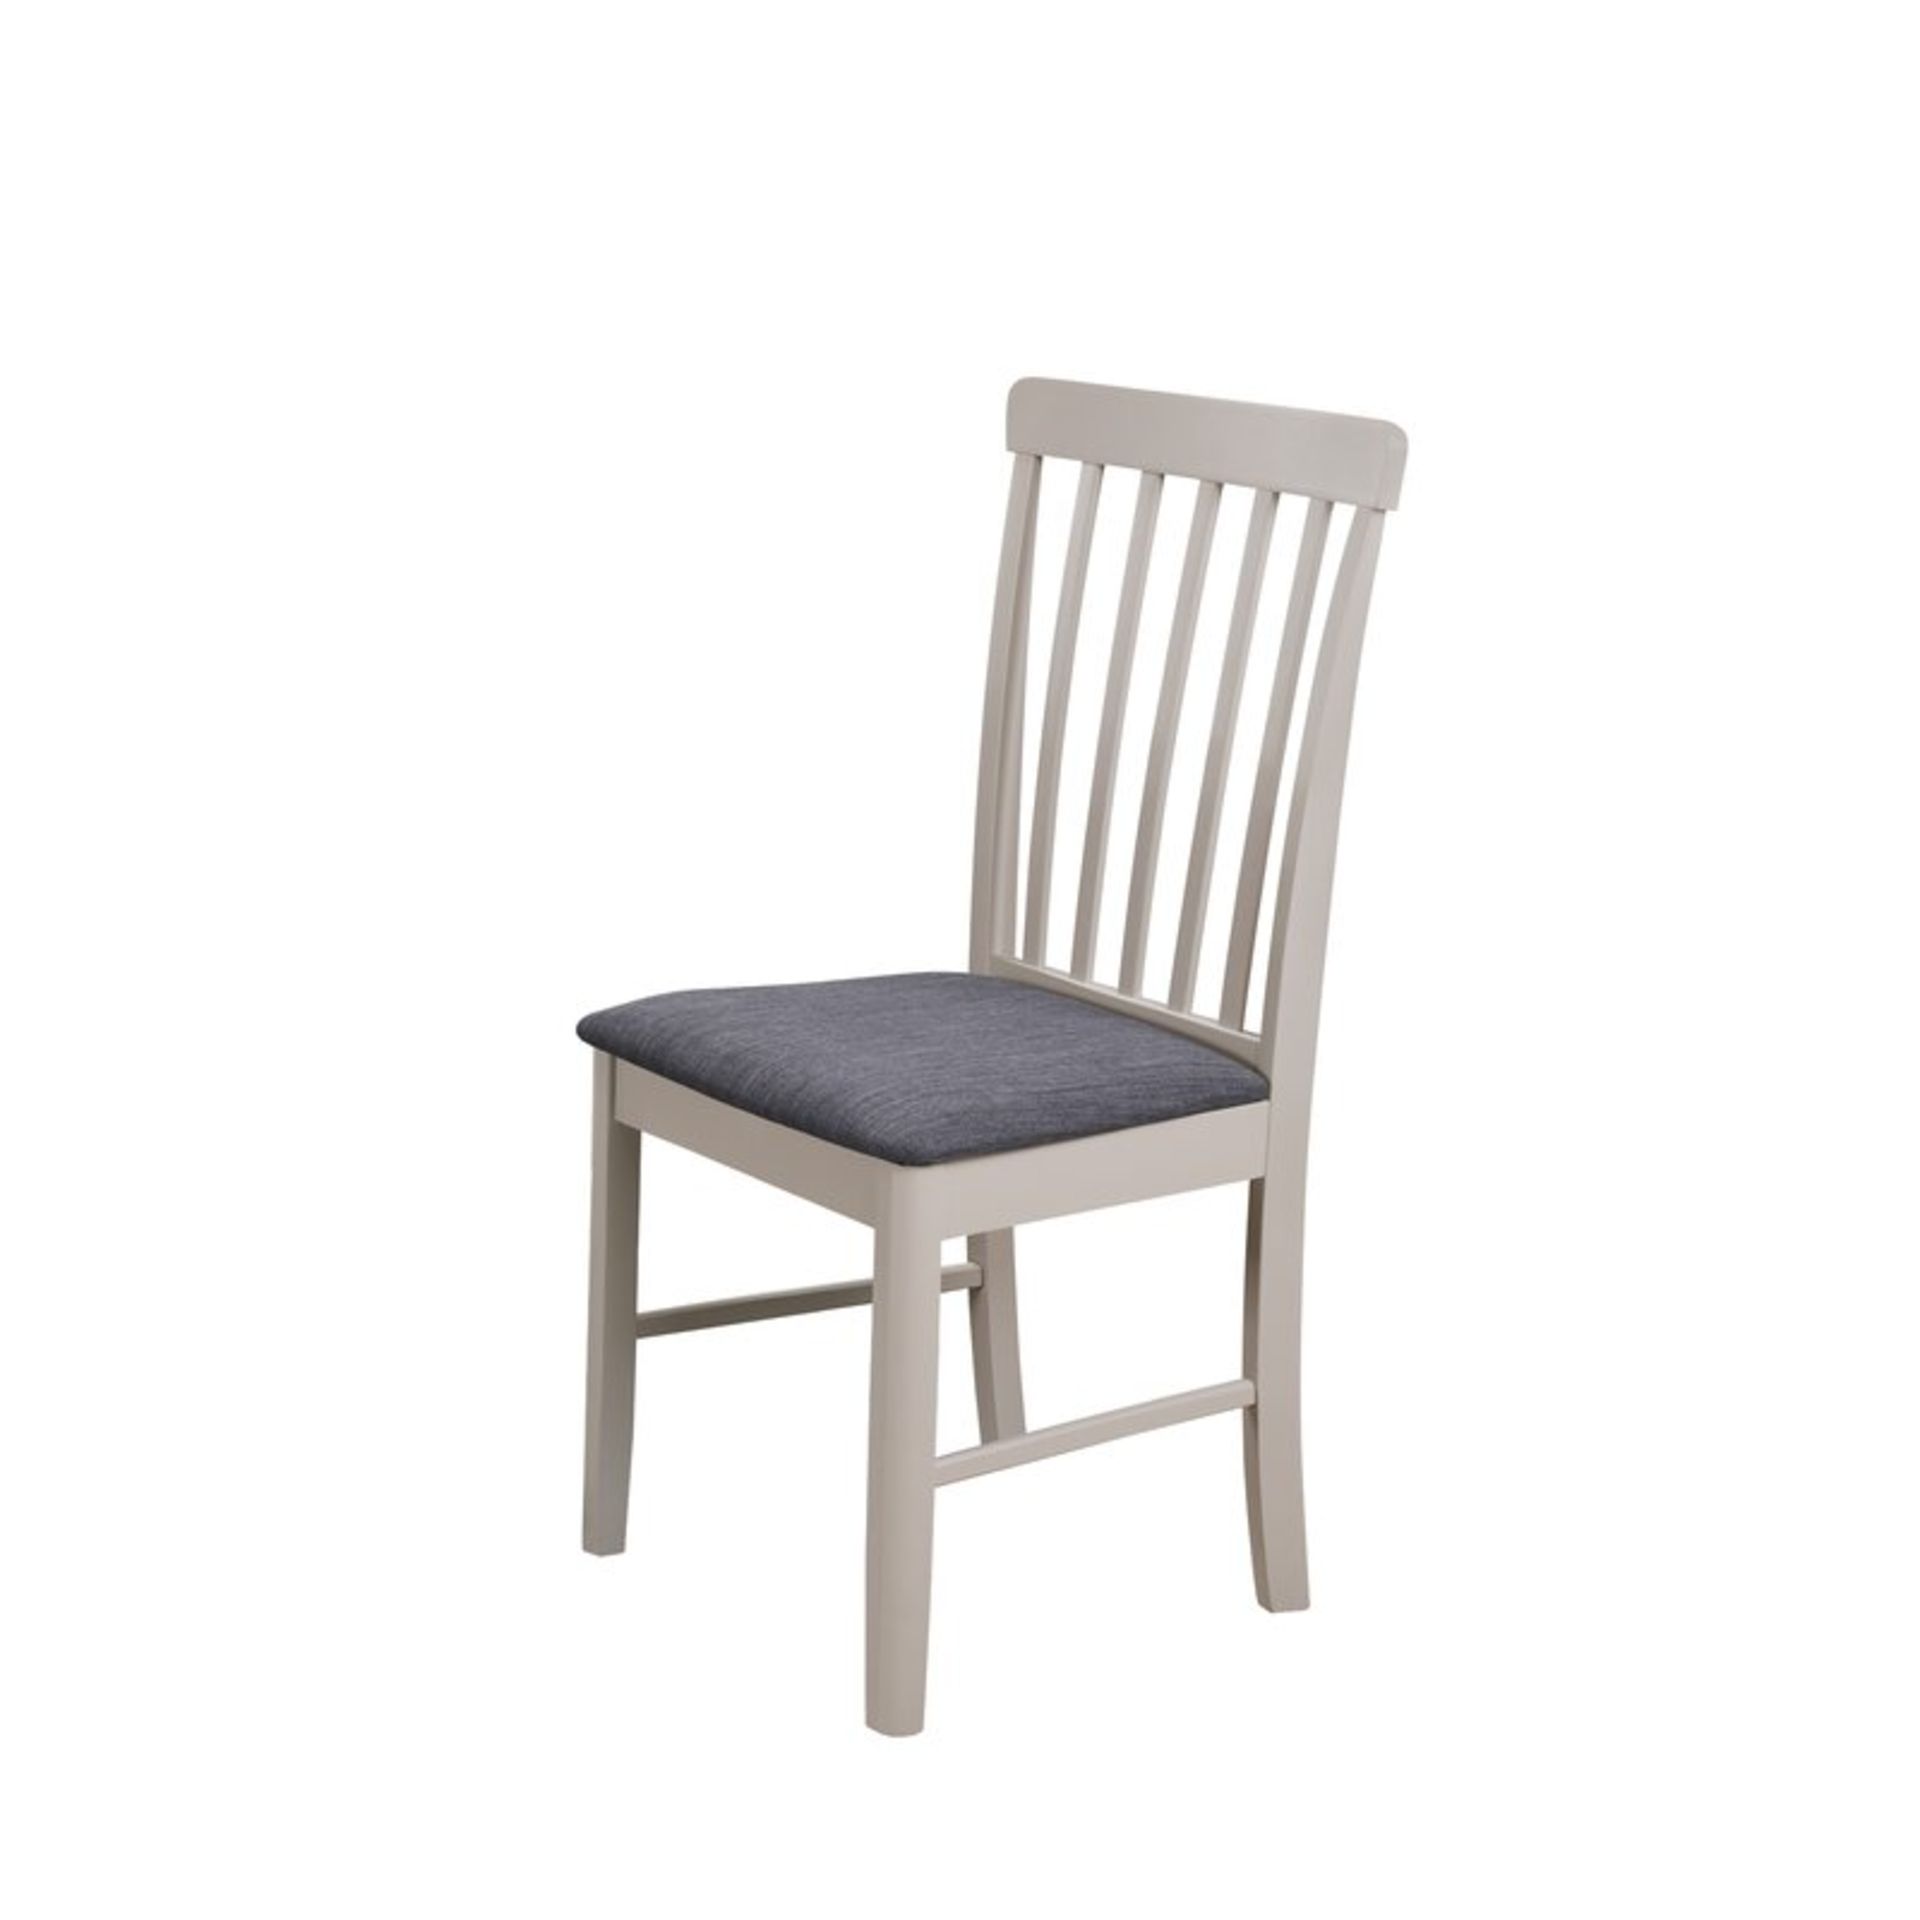 Beachcrest Home Brentwood Upholstered Dining Chair x 2 (pine frame,